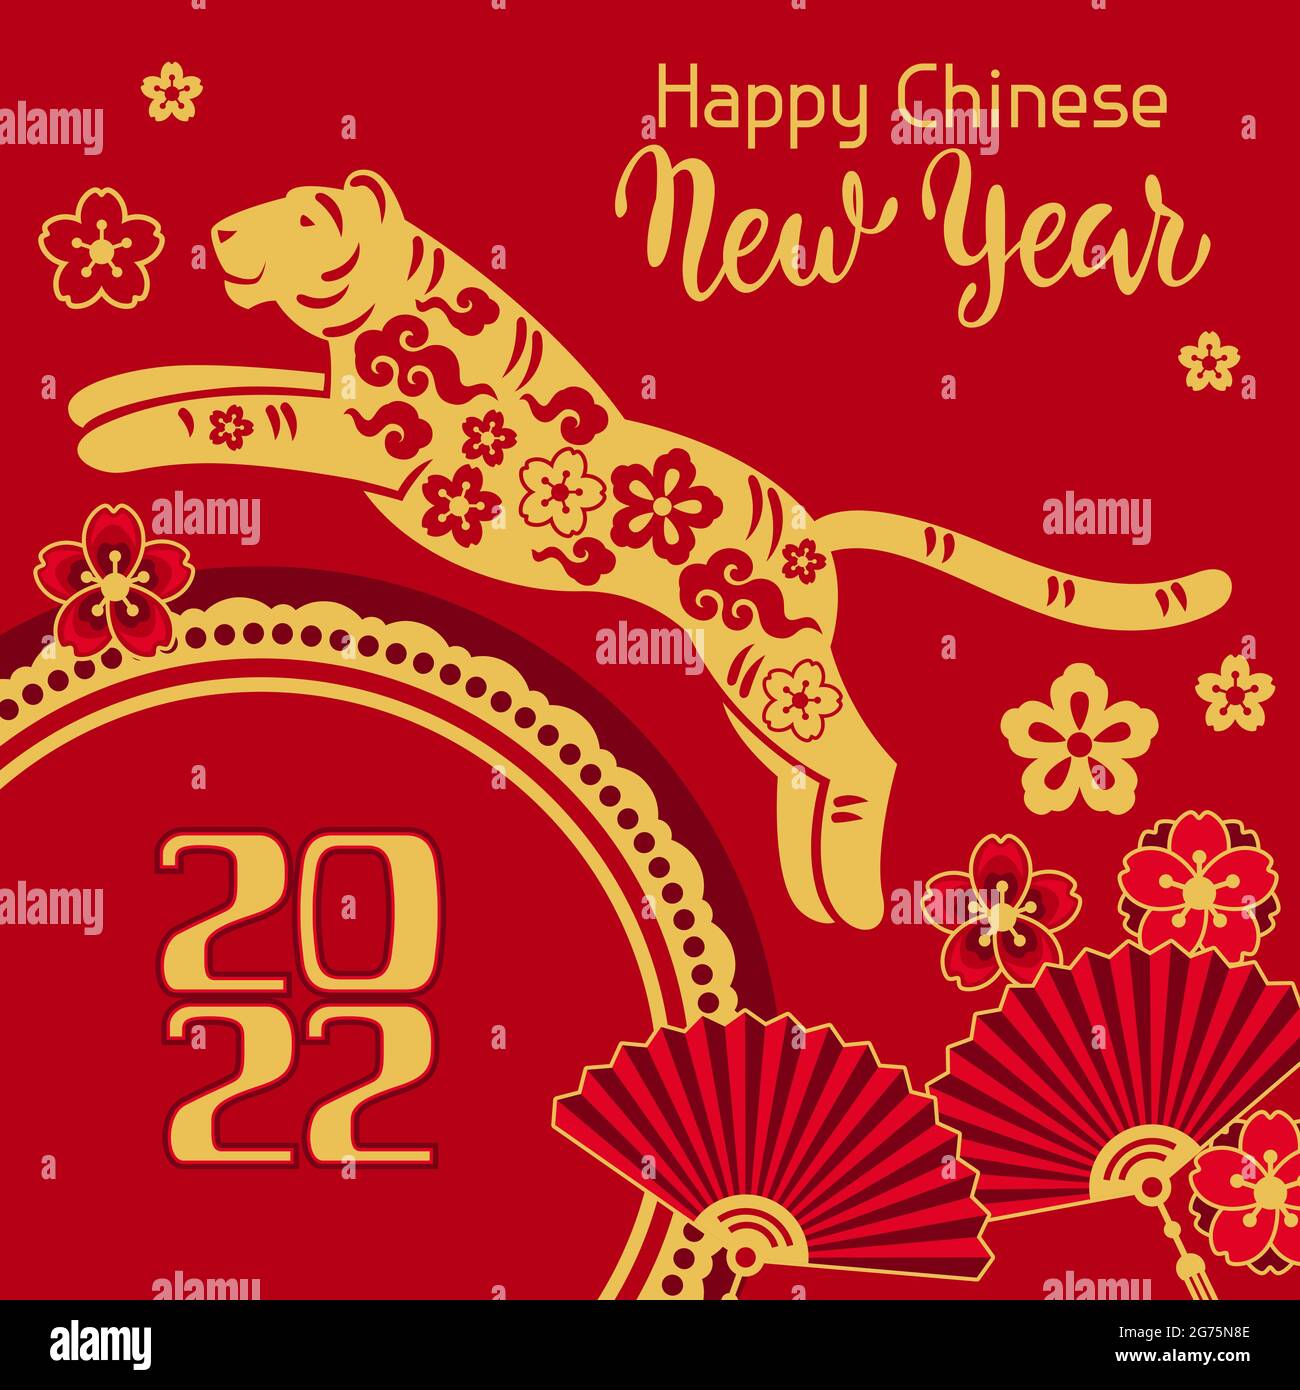 Chinese new year card 2022